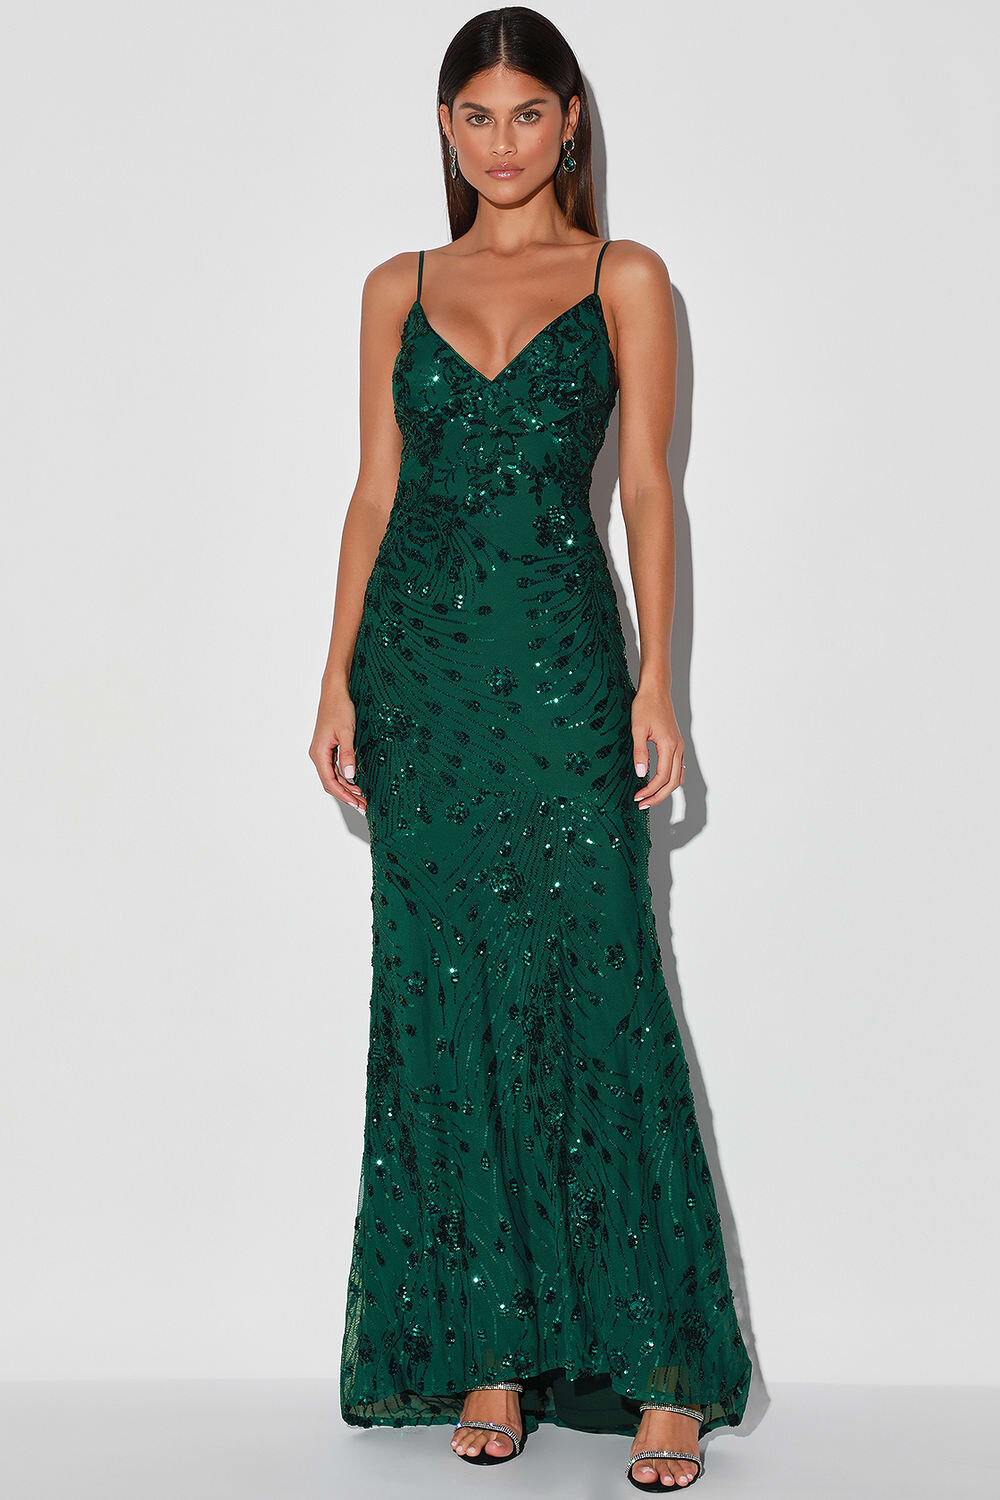 $88 Photo Finish Forest Green Sequin Lace-Up Maxi Dress - Lulus